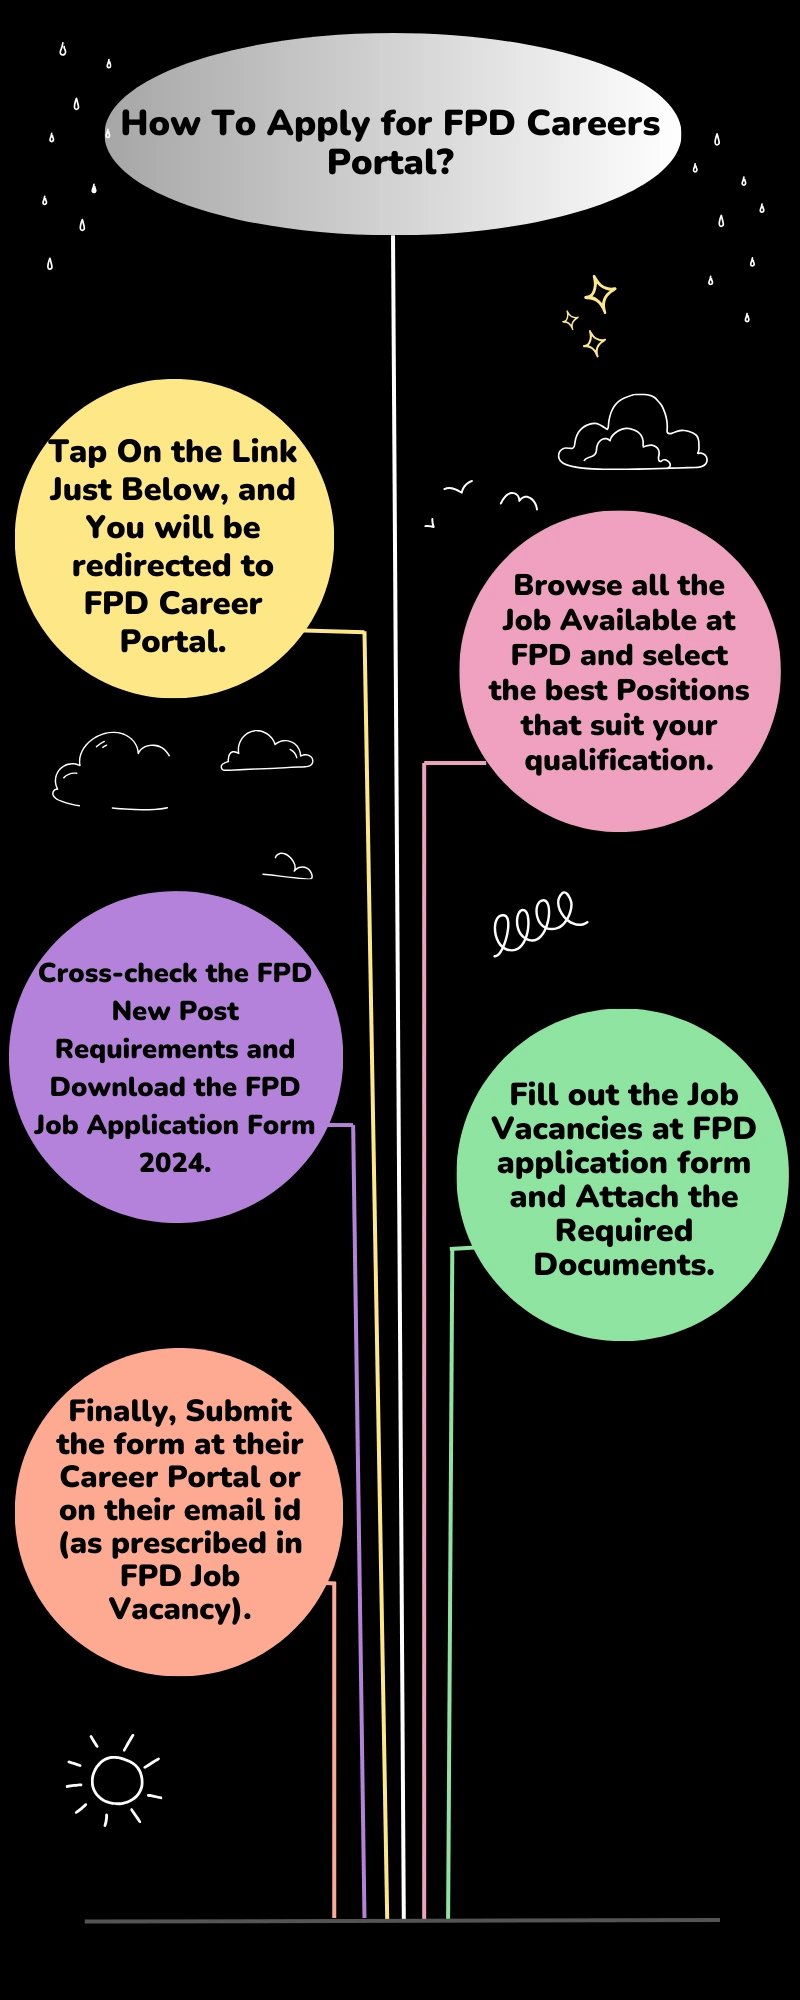 How To Apply for FPD Careers Portal?